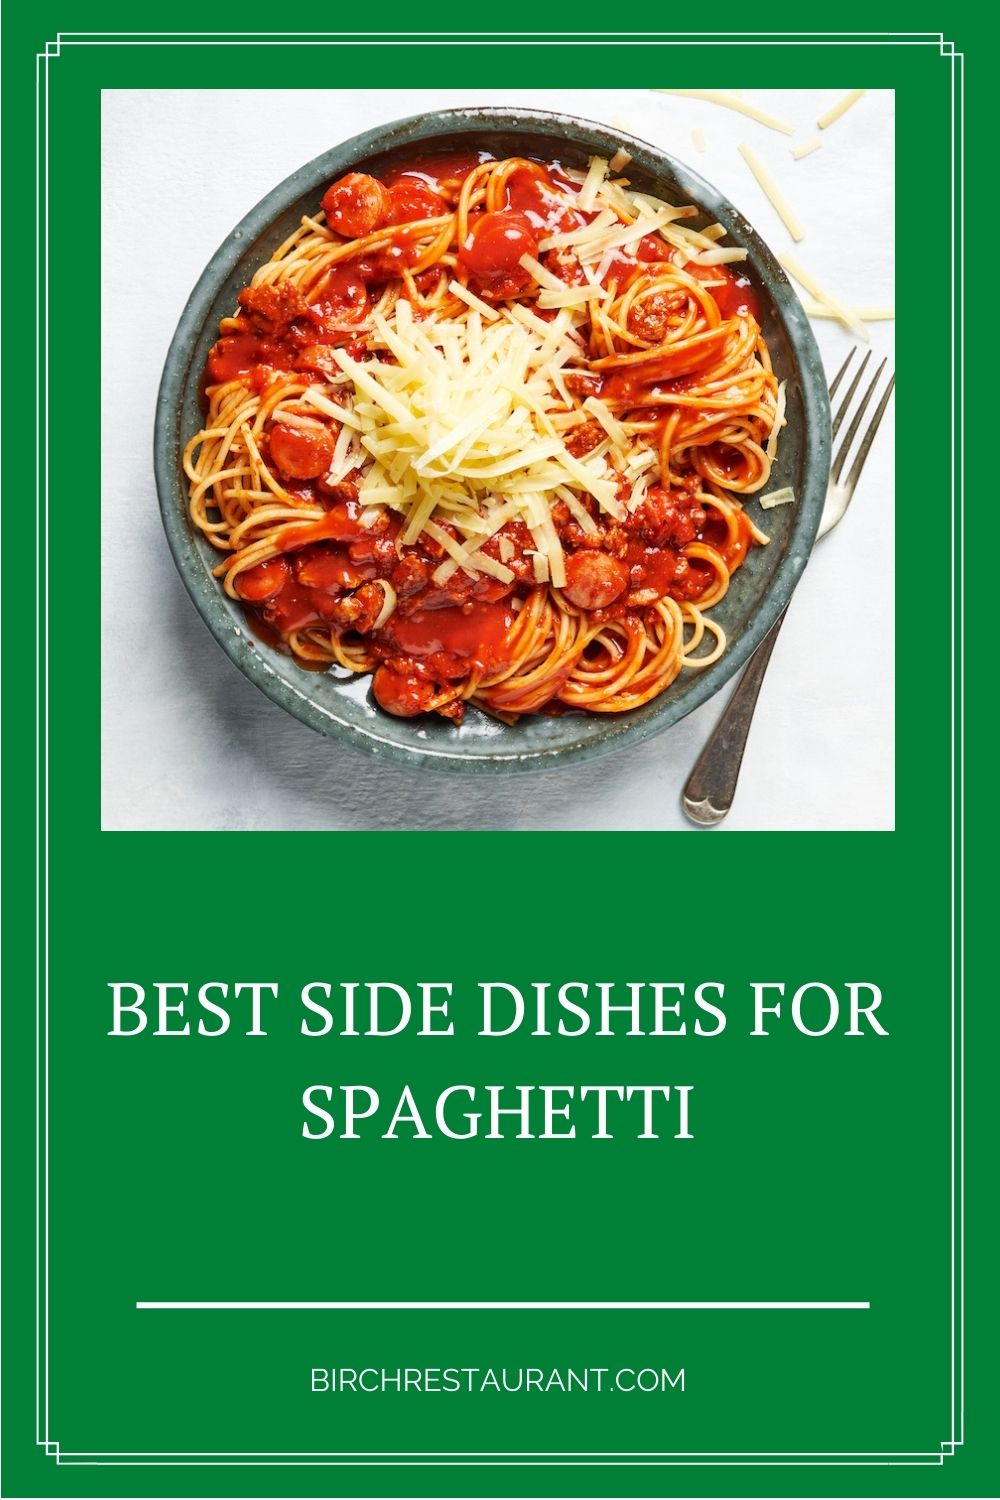 Best Side Dishes for Spaghetti